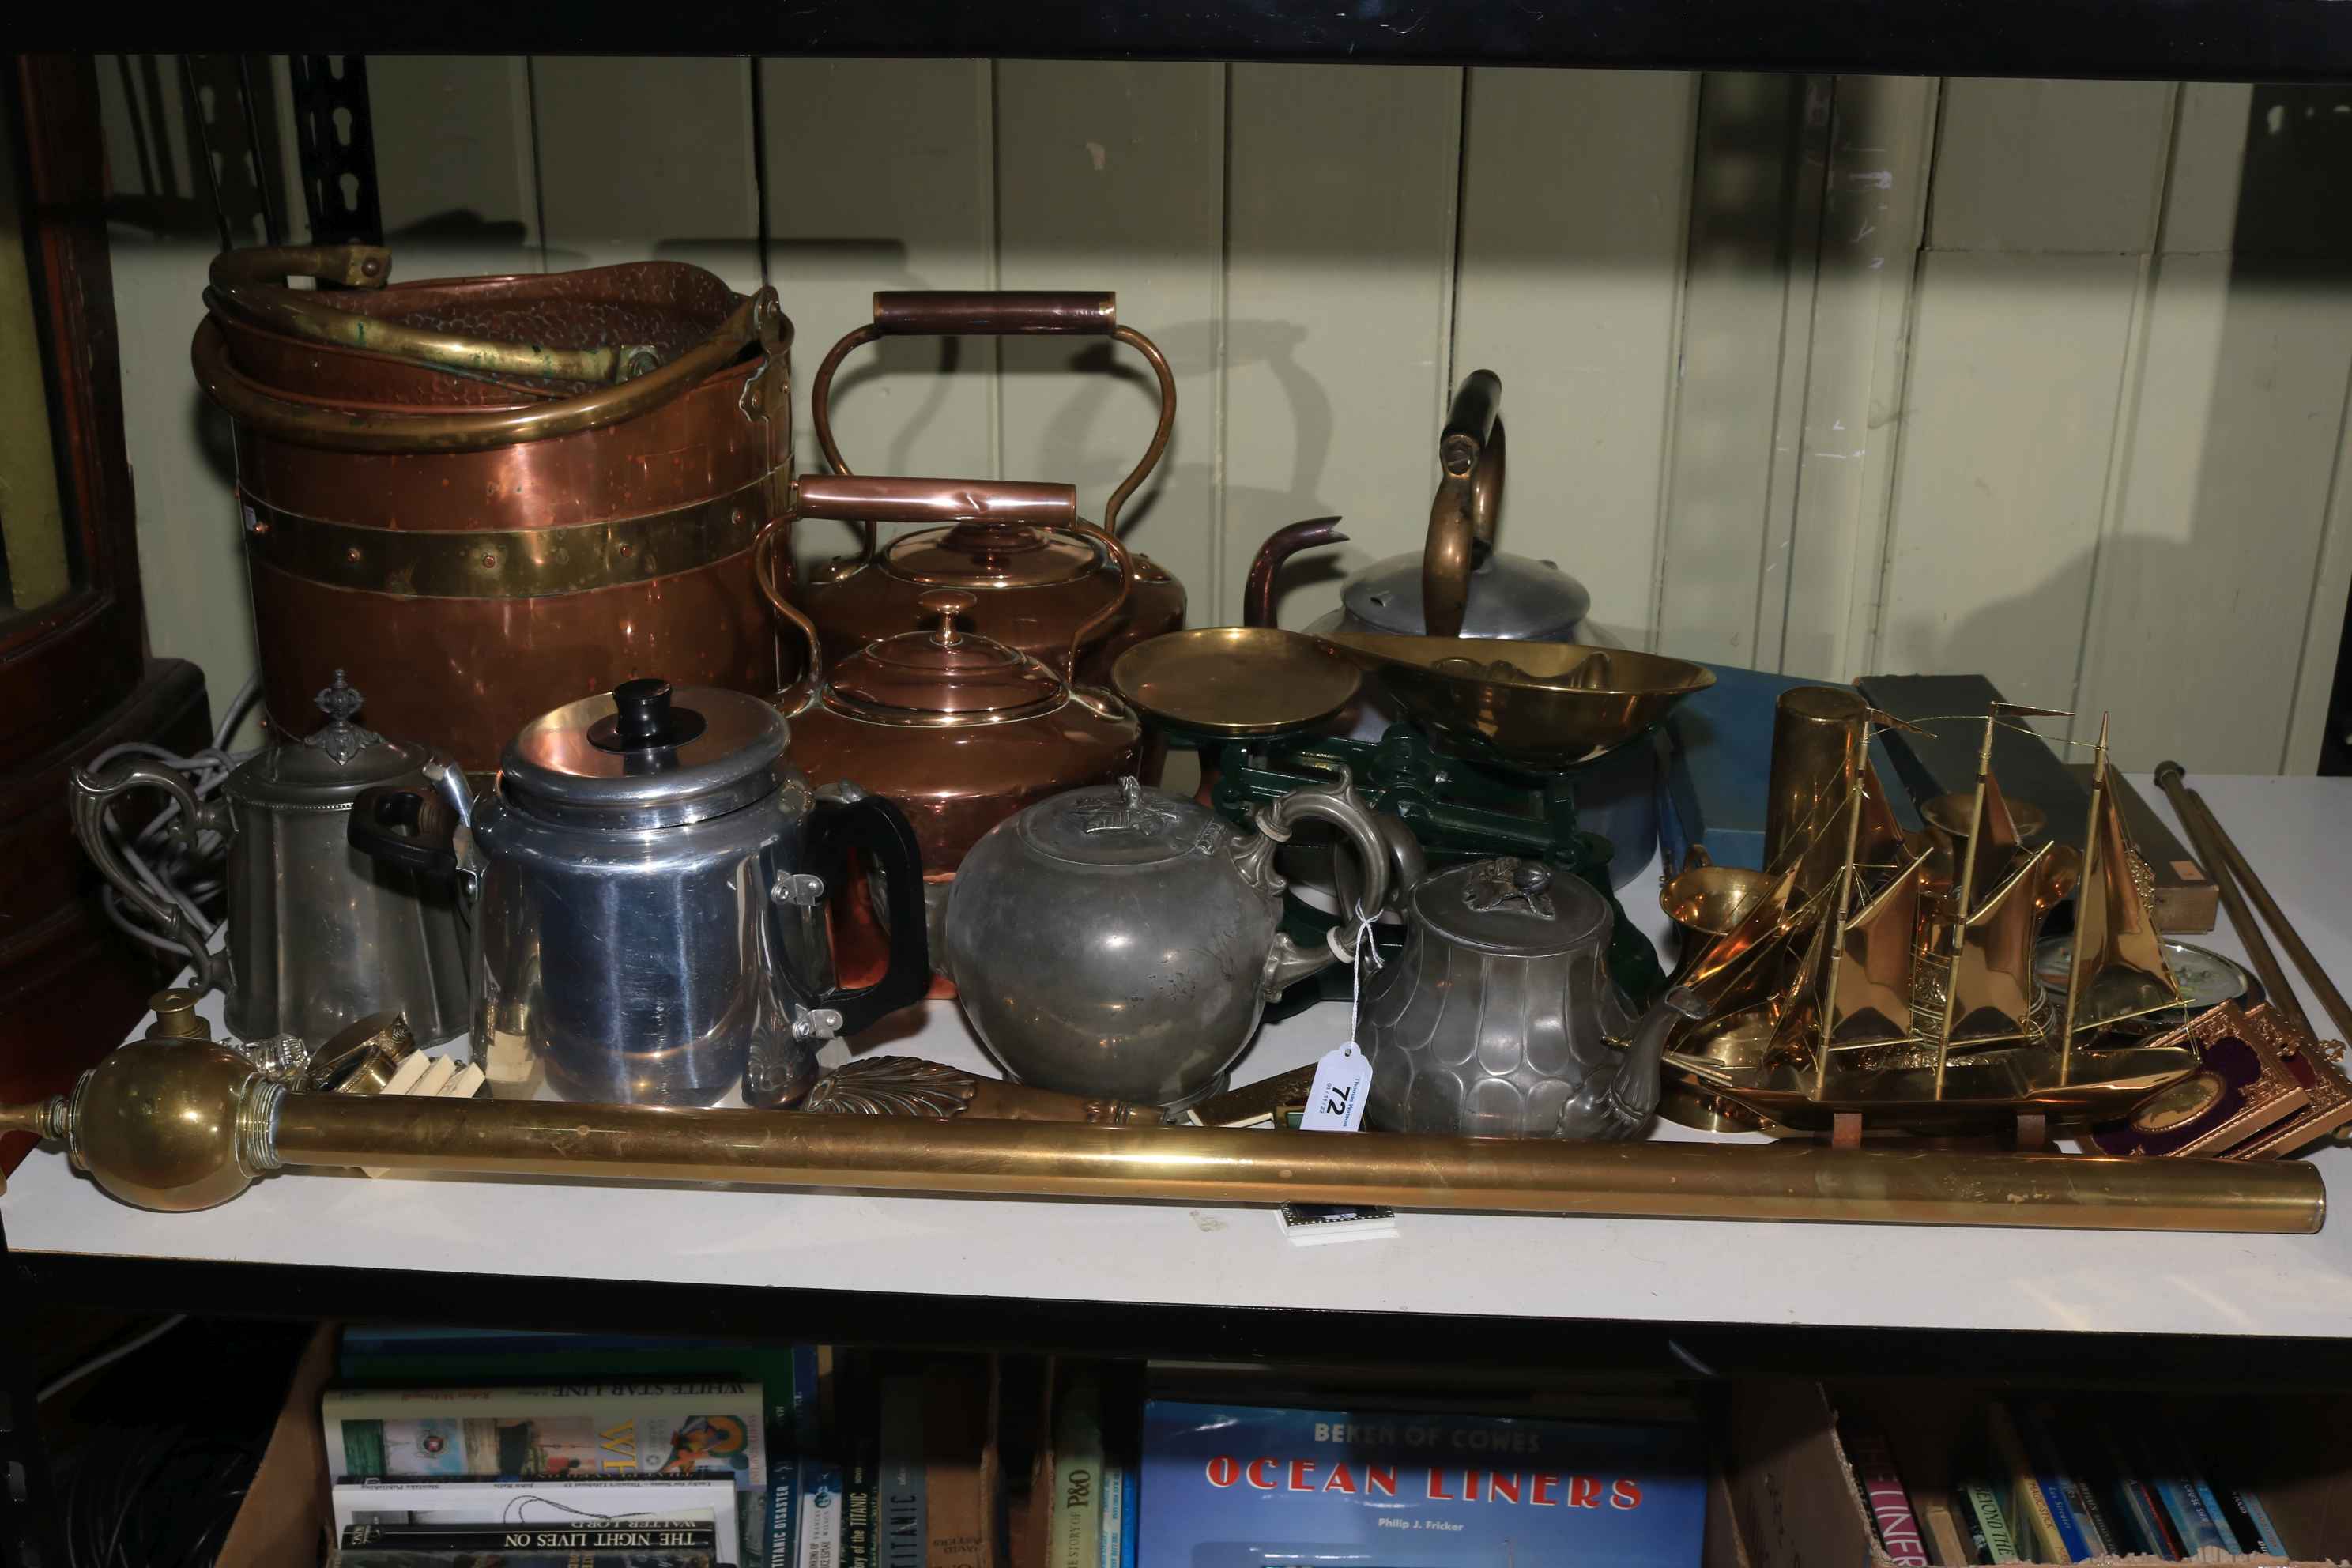 Collection of metalwares including brass and copper bound bucket, scales, teapots, etc.